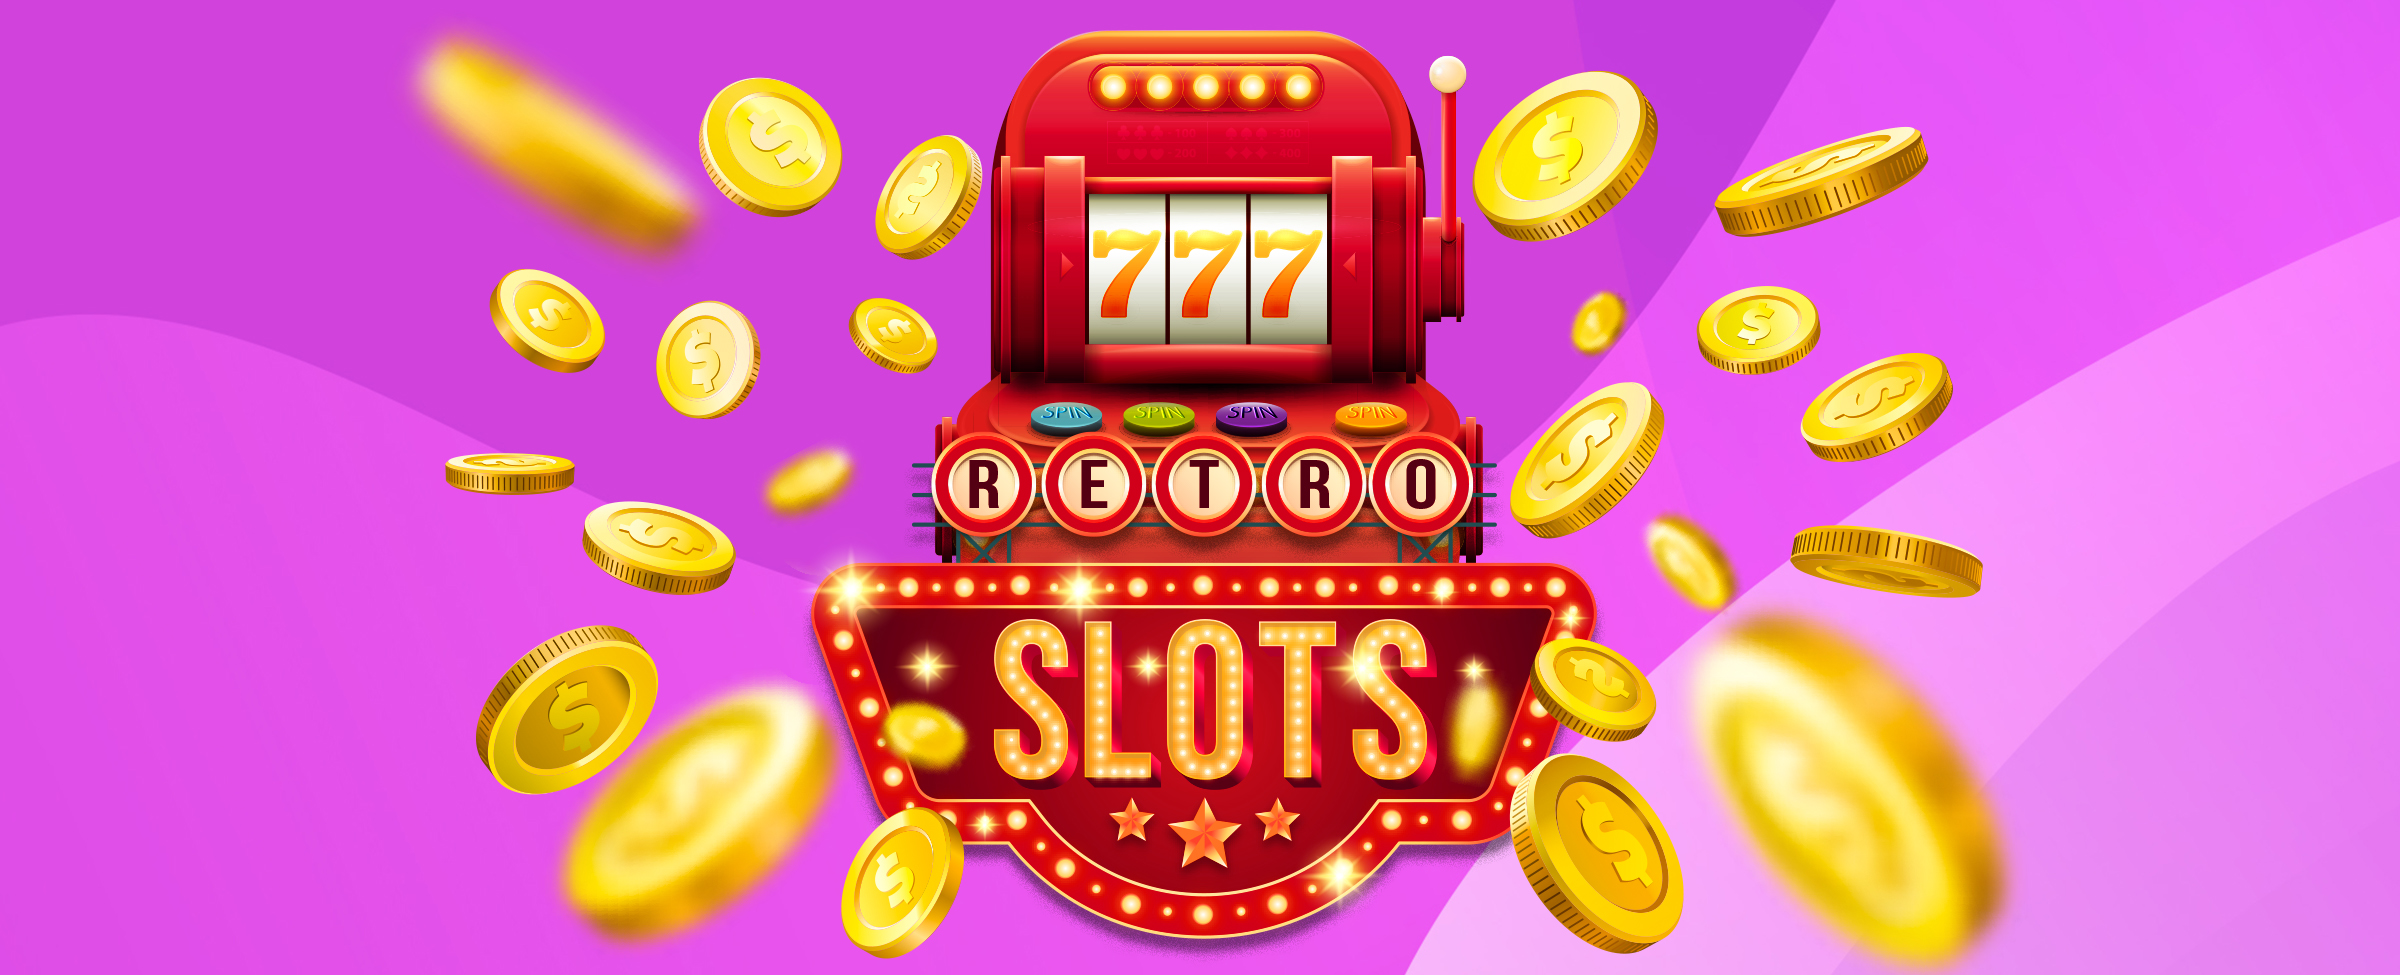 In a world full of choice, sometimes it’s nice to be able to go back to the classics. Join SlotsLV as we feature some of the best classic slot games you’ll find anywhere. Buckle in!